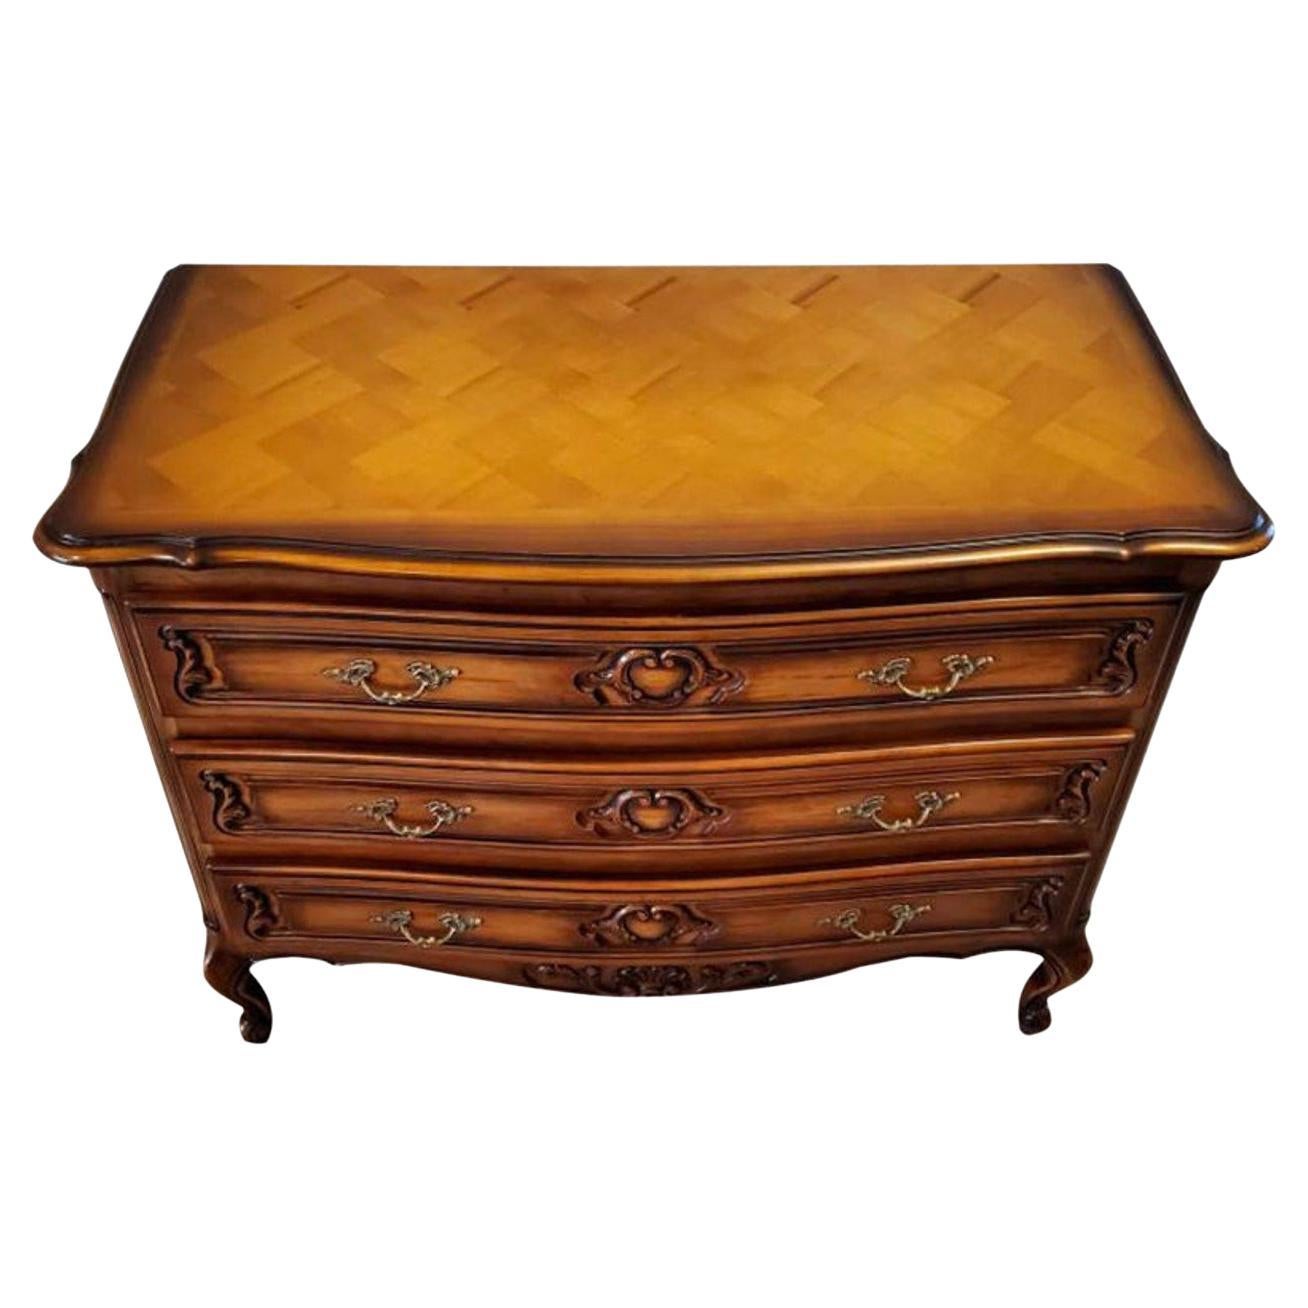 A stunning, very fine quality, fruitwood chest of drawers, featuring superior craftsmanship, superb detailing and elegant decorative accents, this vintage French chest of drawers (bedroom commode - dining room server sideboard - buffet - credenza -